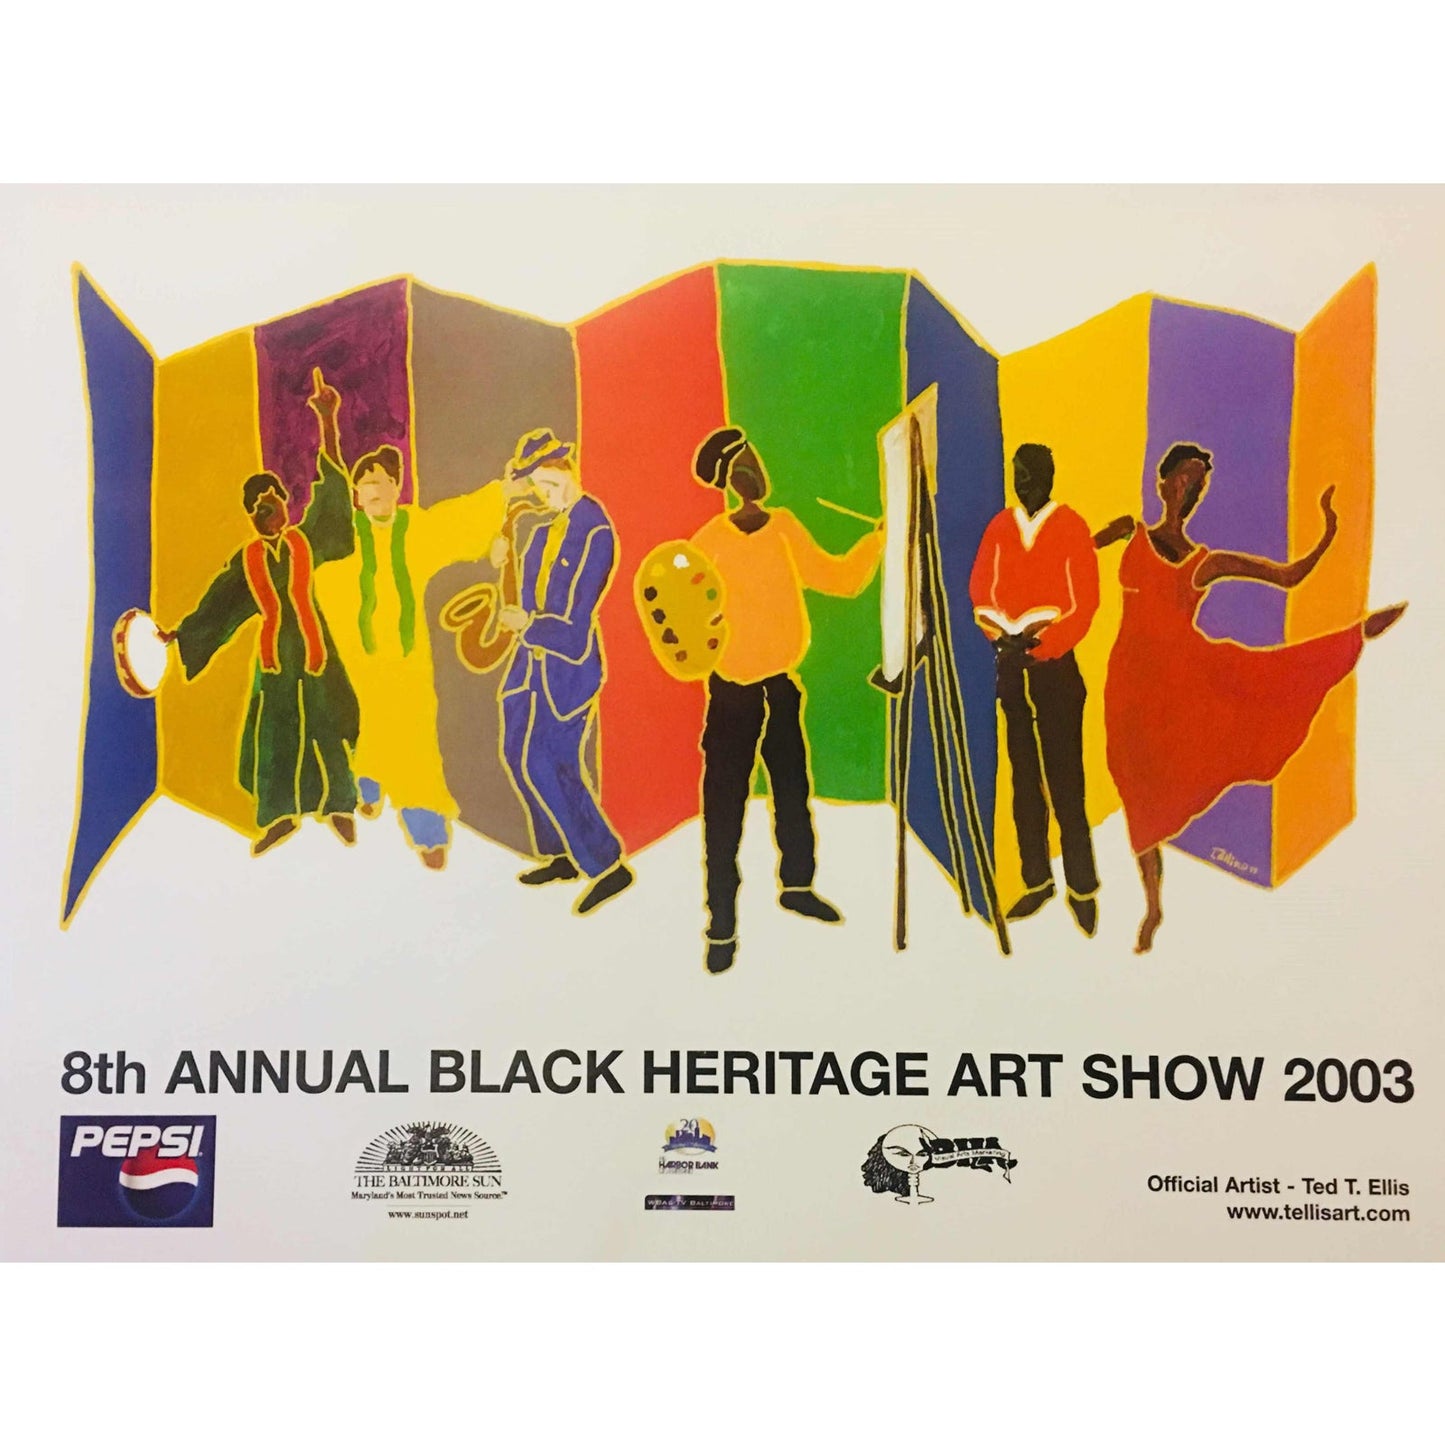 Ted T. Ellis 2003 Black Heritage Art Show 8th Annual Poster Print